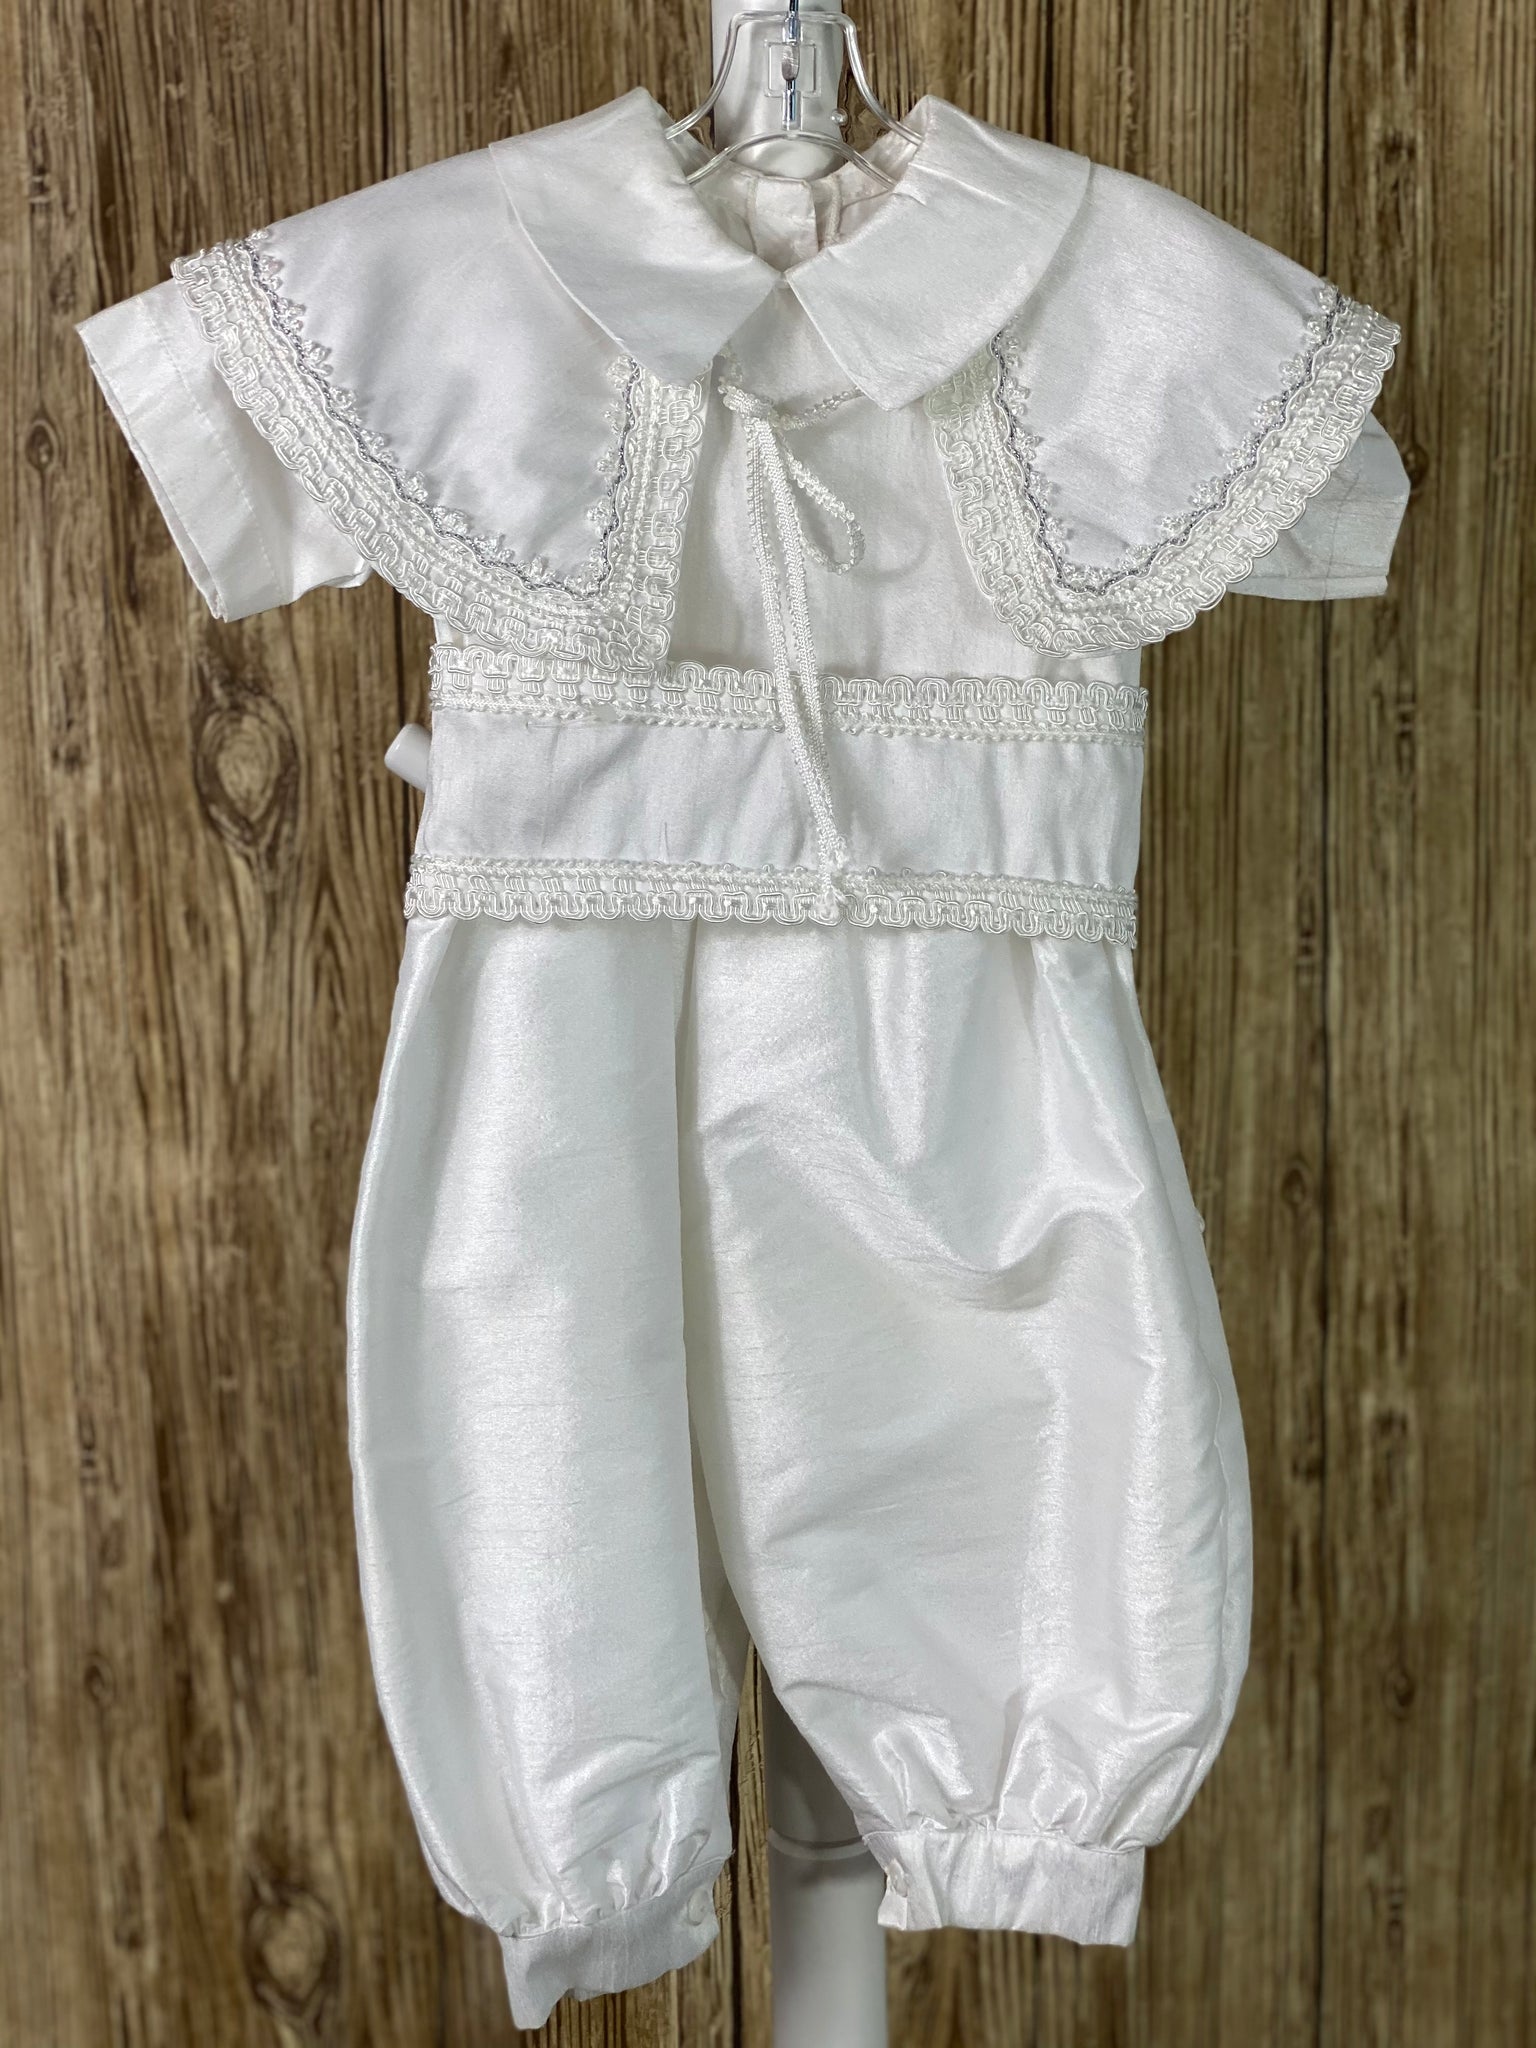 WHITE   4-piece white set including romper, belt, beret and mozzetta Collared with short sleeve Intricate braided trim lining belt and mozzetta edges Thin trim lining cuffs, beret, and bodice Button closure on back Rope closure on mozzetta